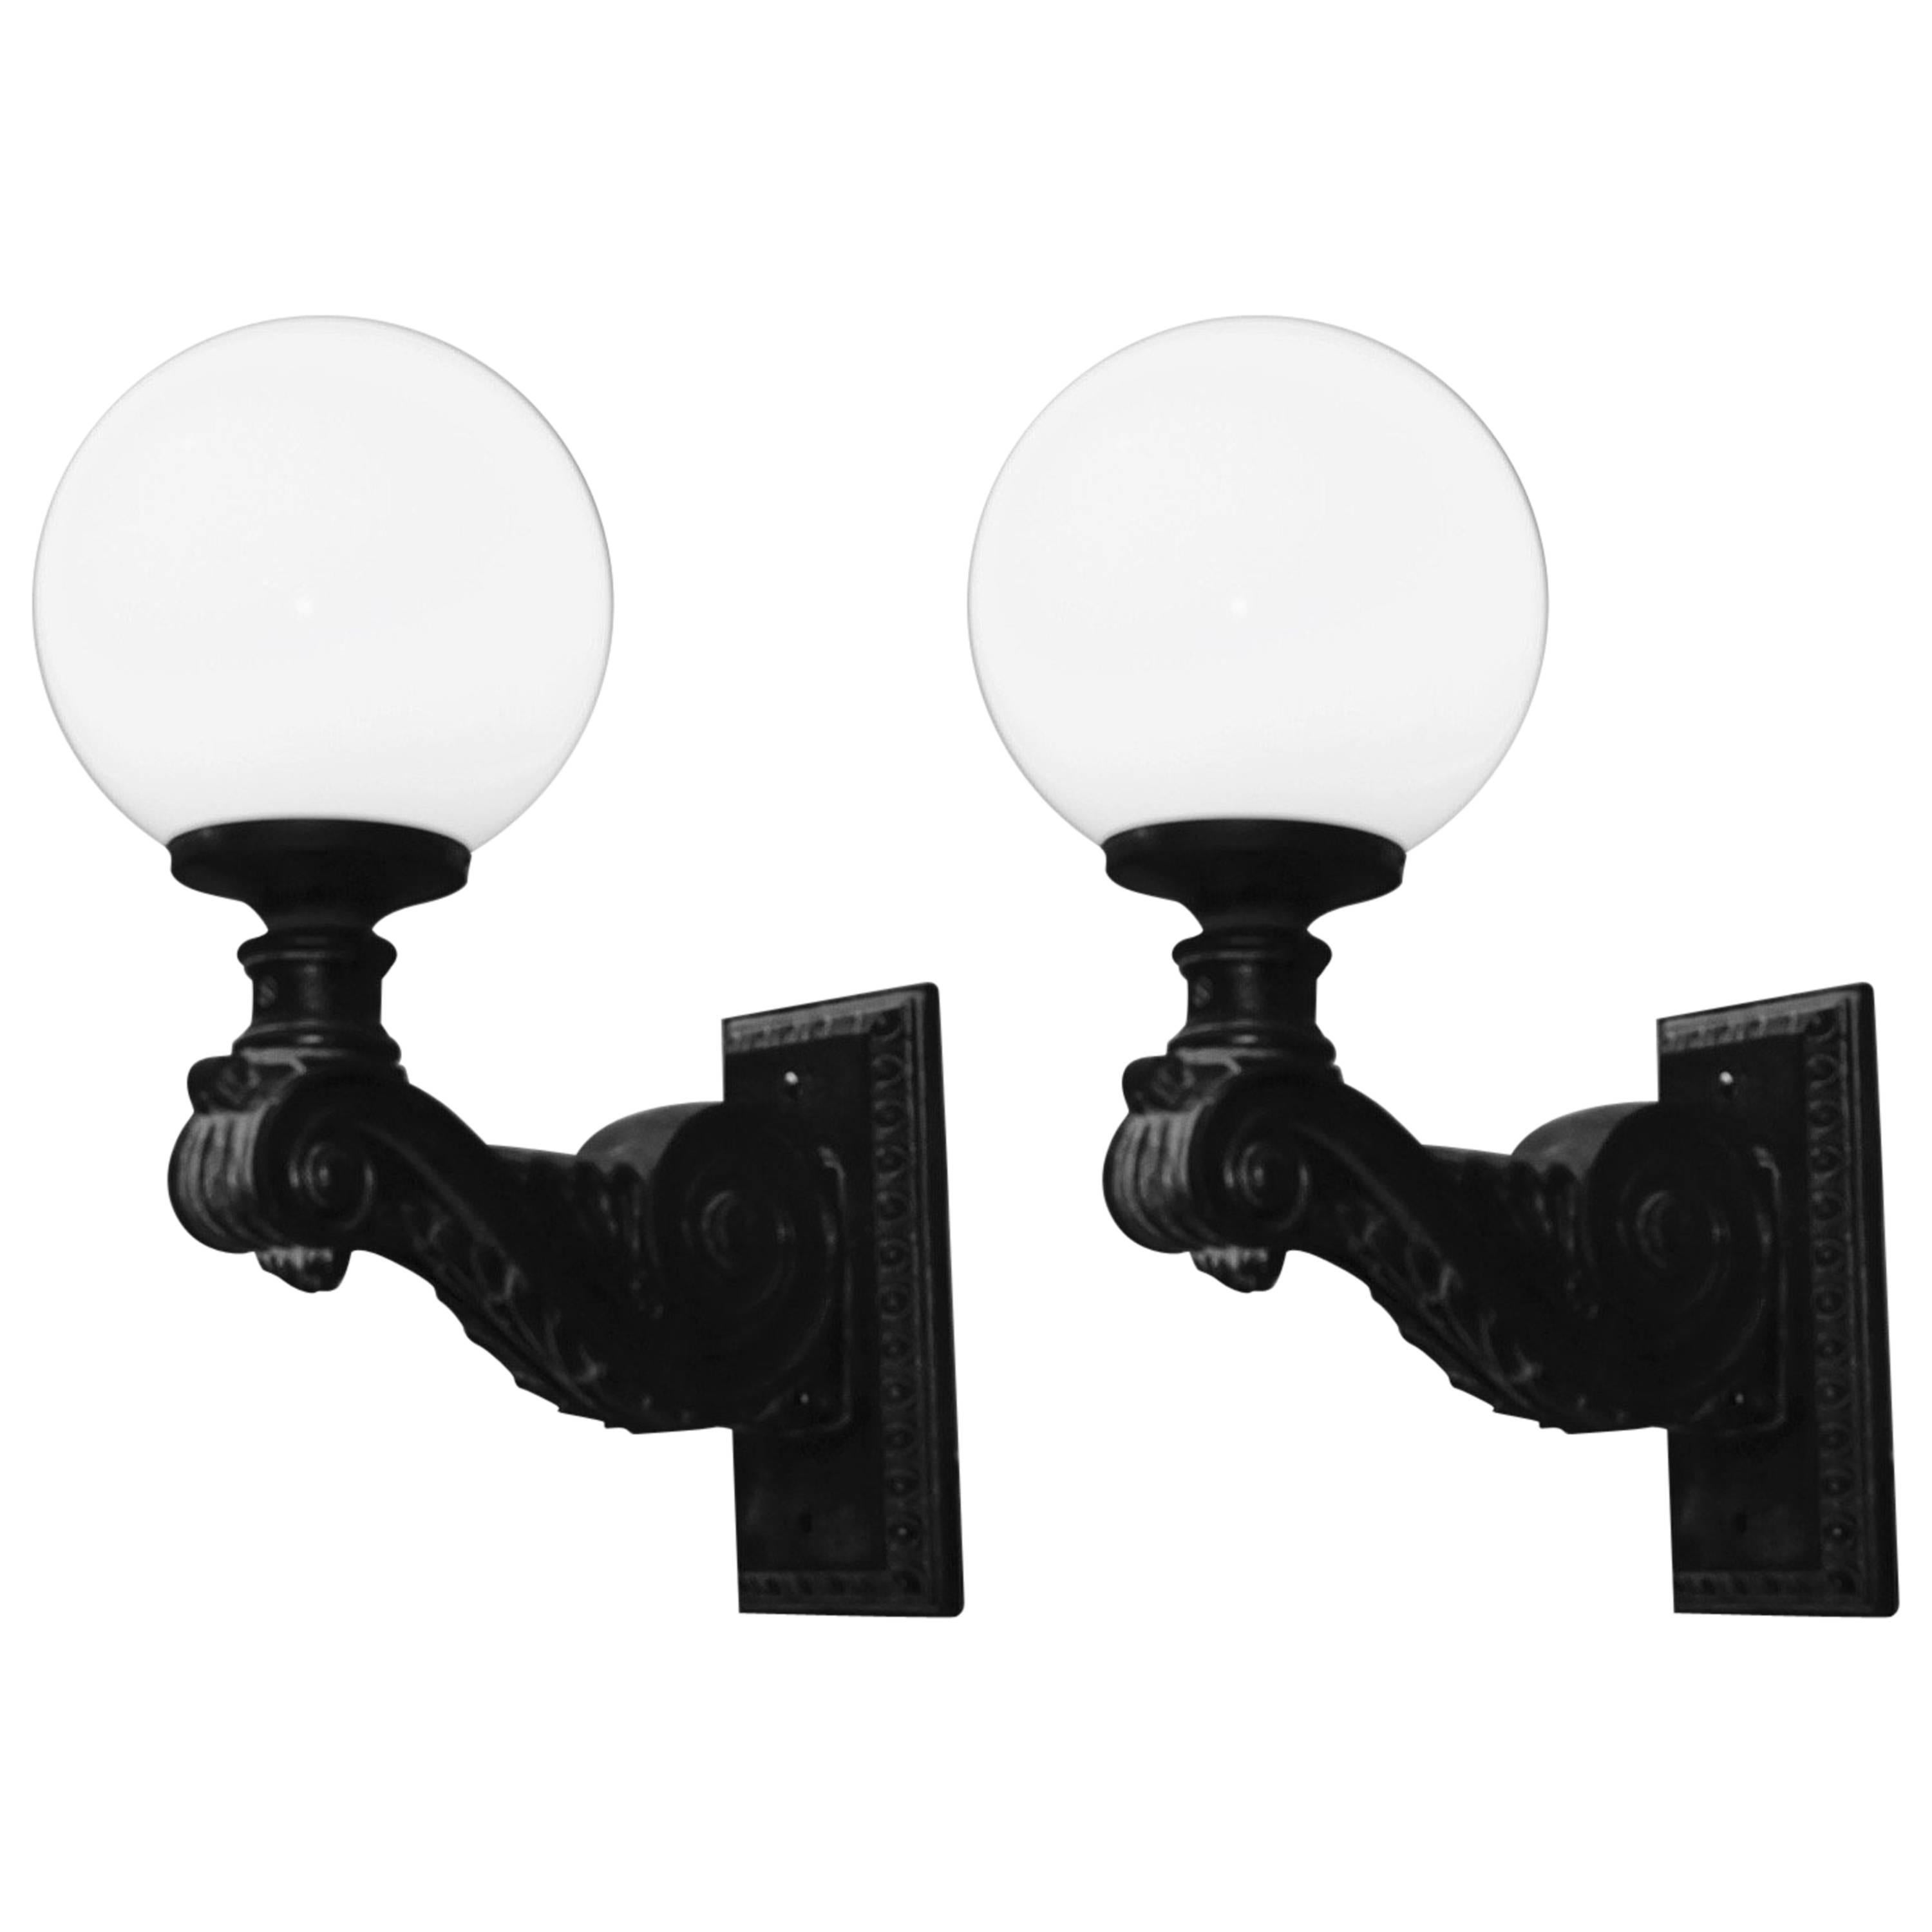 Pair of Large Outdoor Iron Sconces with Opal Global Shades, New York US, 1920 For Sale